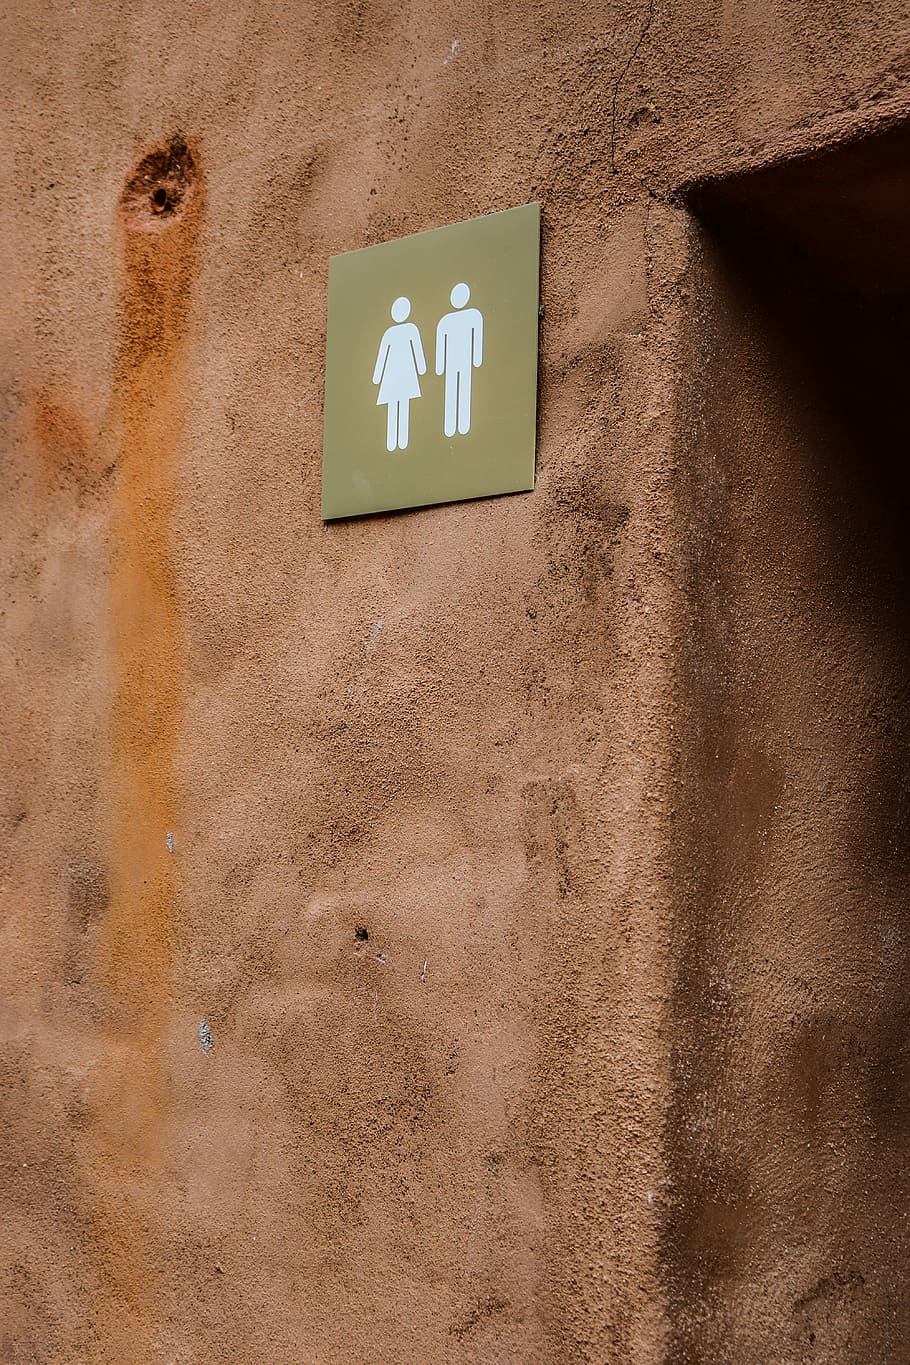 bathroom signage on brown wall, male and female signage mounted on brown concrete wall